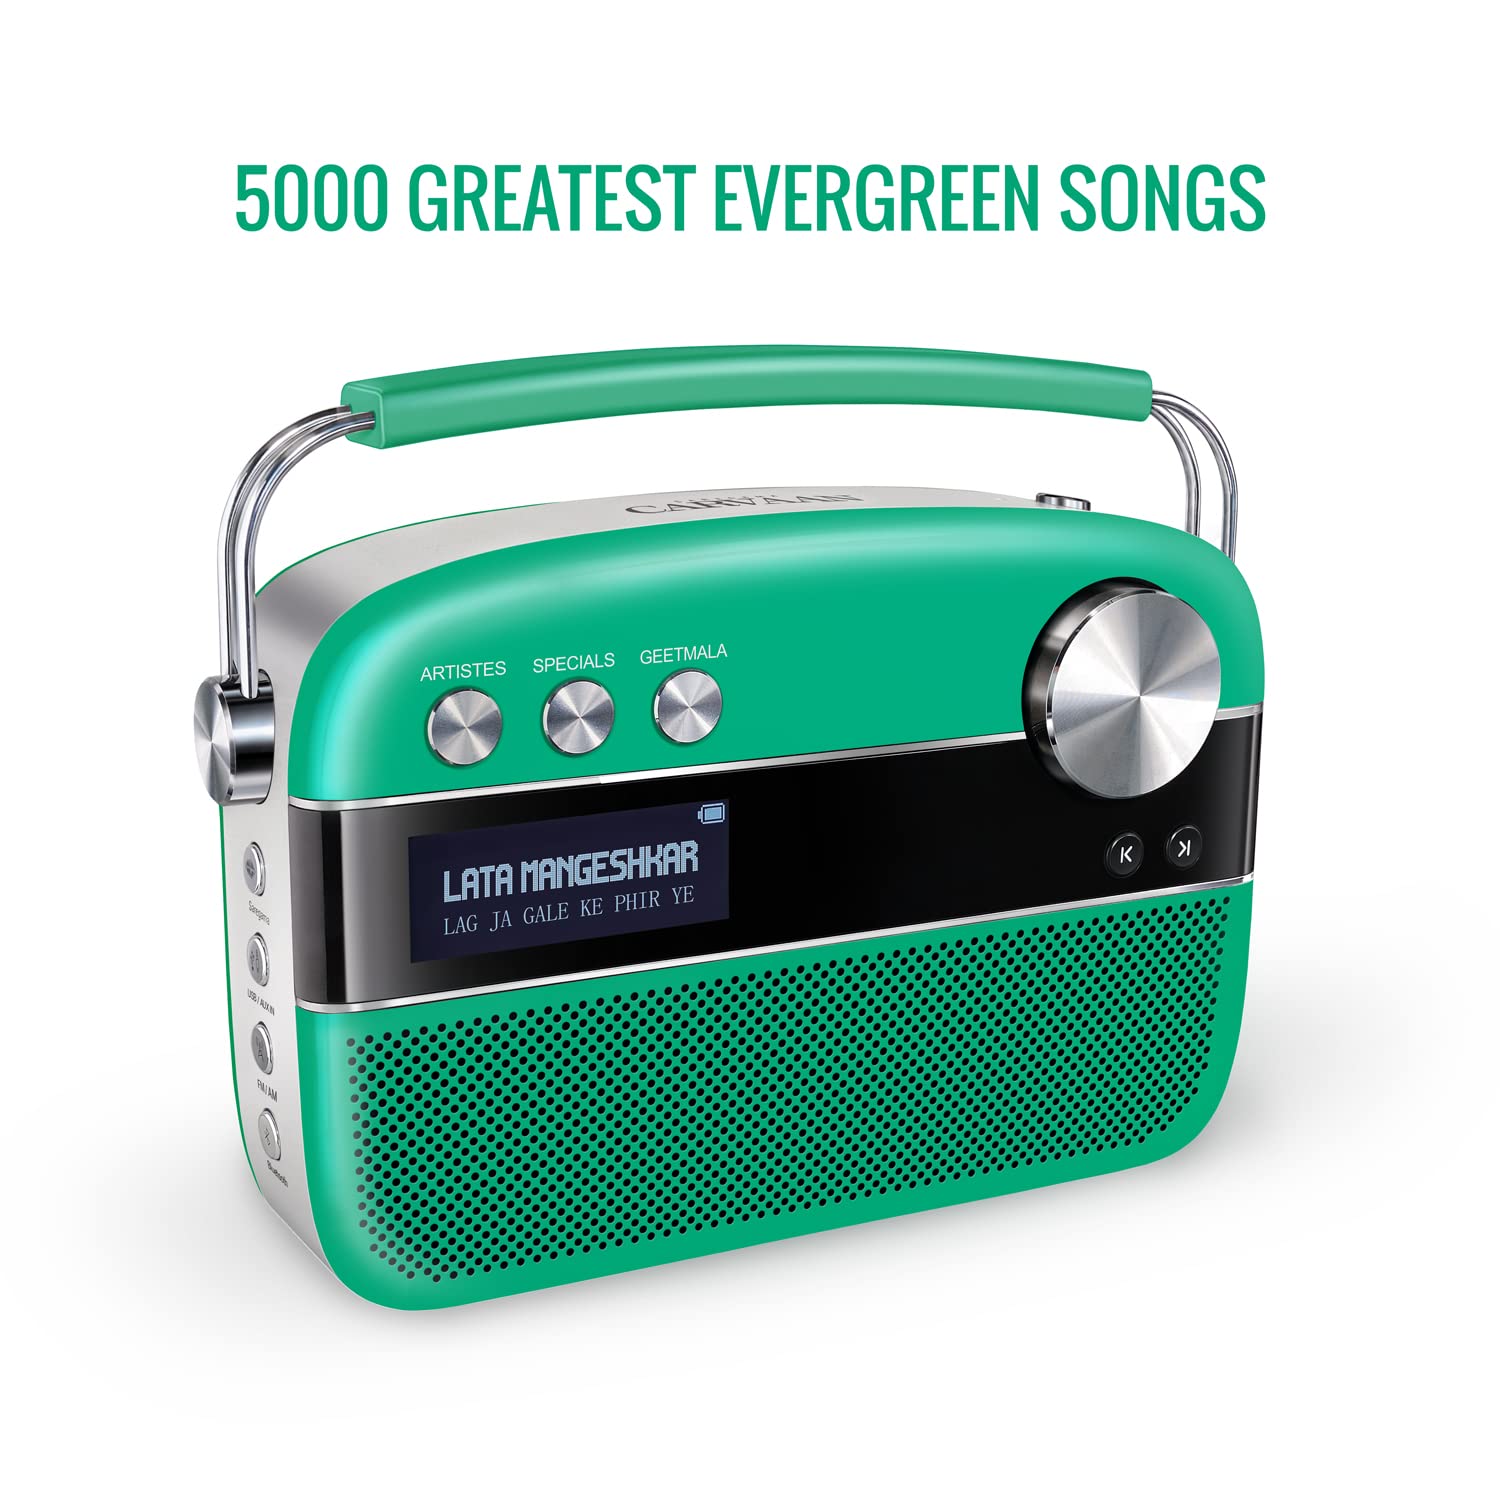 Saregama Carvaan Premium (Pop Colour Range) Hindi - Portable Music Player with 5000 Preloaded Songs, FM/BT/AUX (Forest Green)